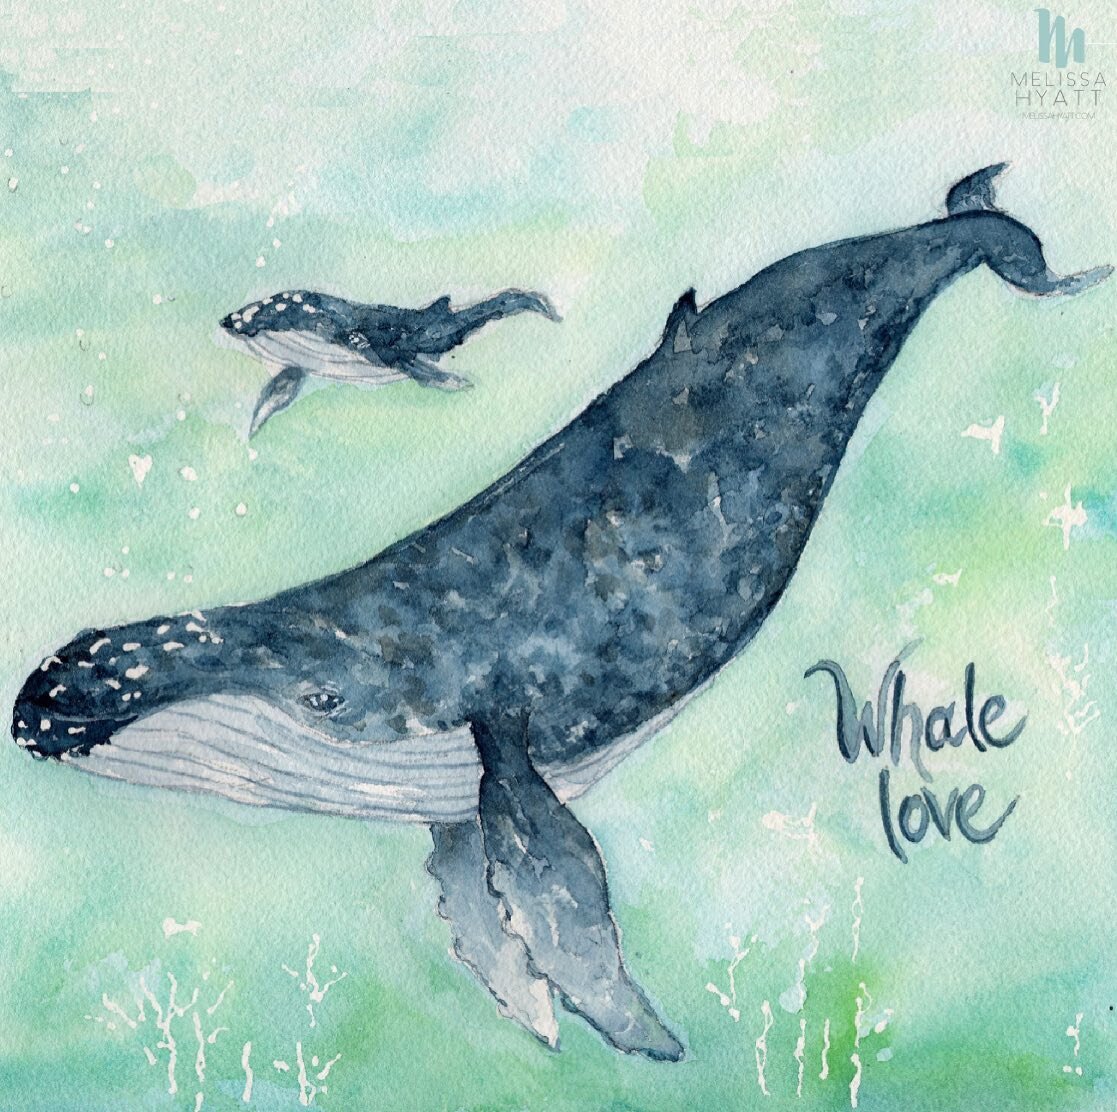 Painting whales for Greenpeace and also just because I love them. My piece for the #Drawtheocean challenge by @greenpeaceuk. We must protect these magnificent creatures. 🐋 🐋 #whales #humpbackwhale #undersea #greenpeace #watercolorwhale #watercolor
